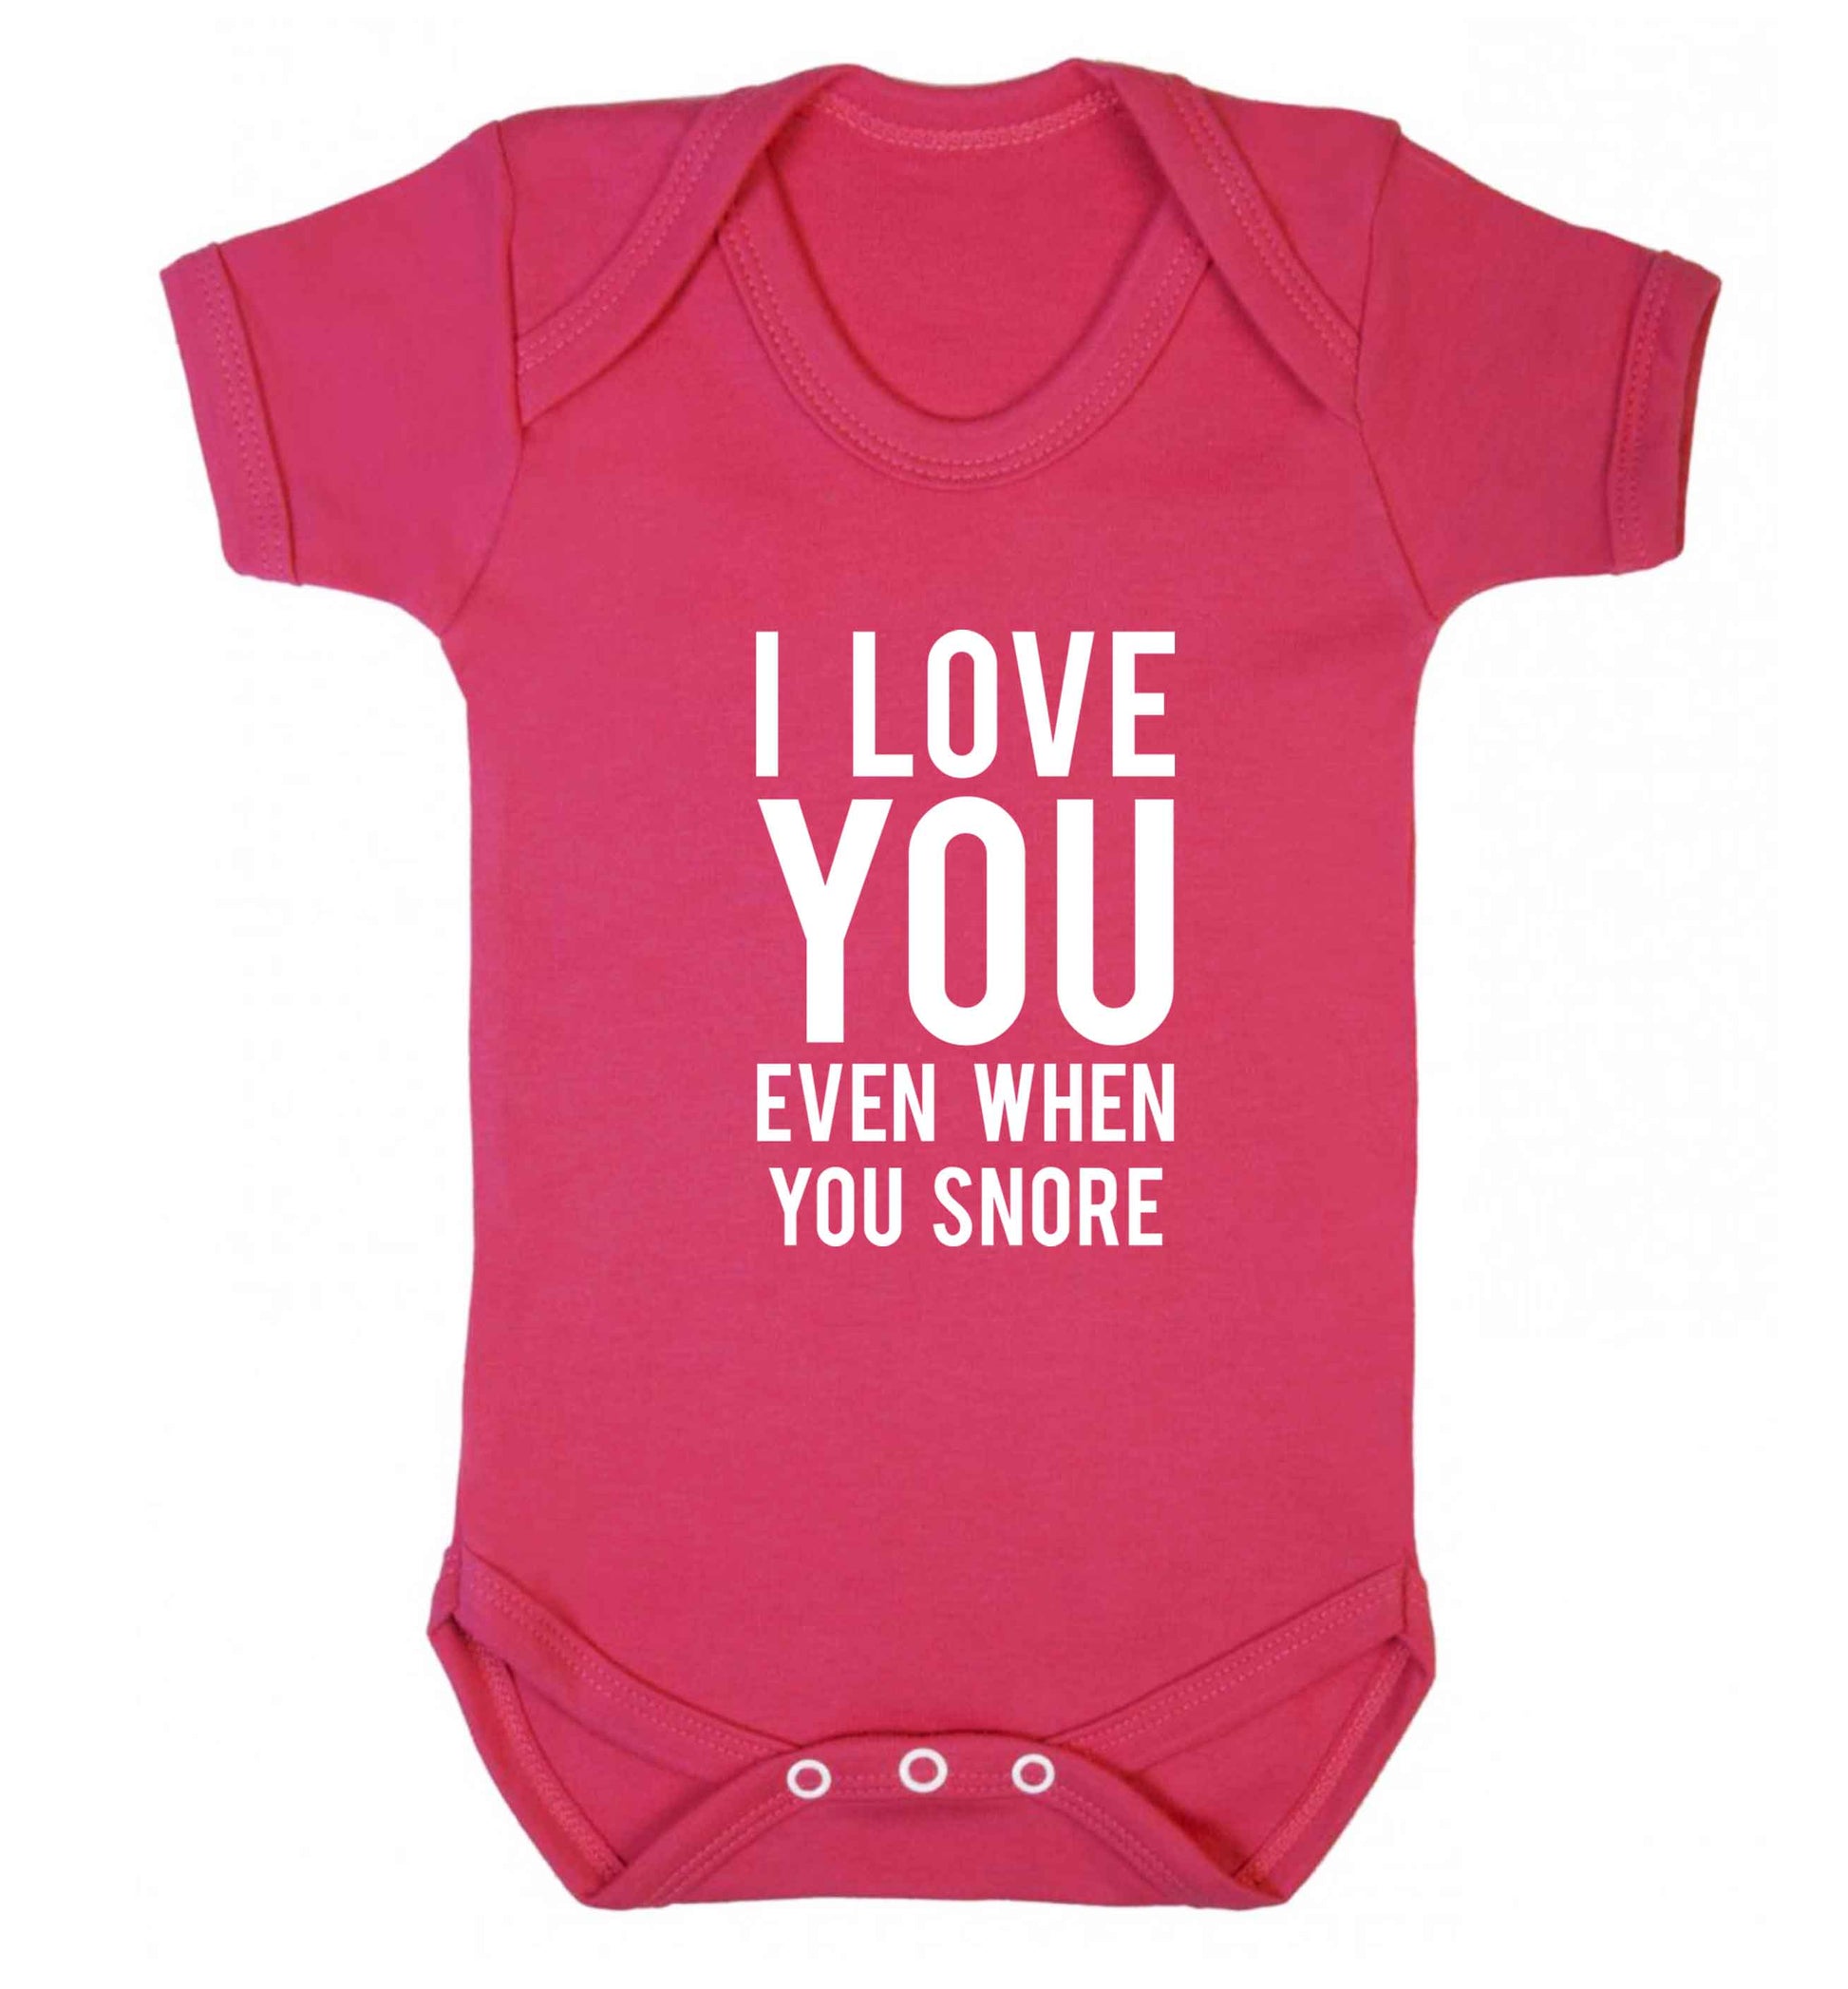 I love you even when you snore baby vest dark pink 18-24 months